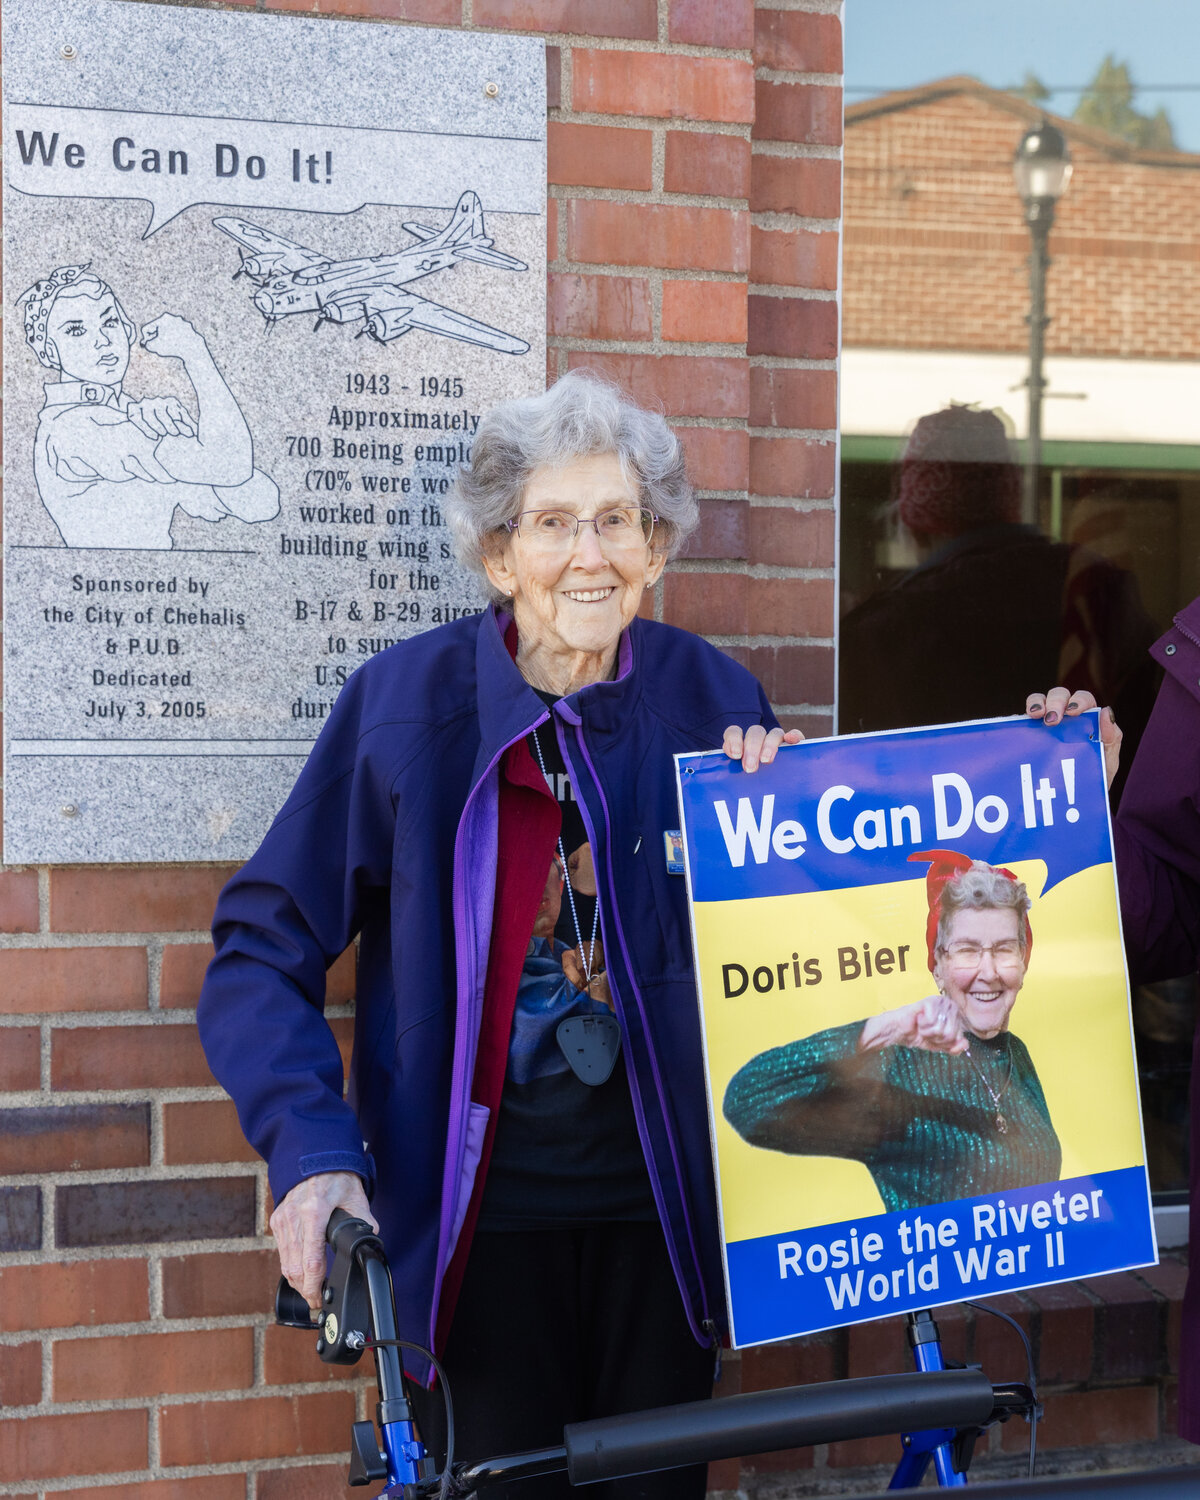 Doris Bier smiles for a photo alongside a “Rosie The Riveter,” plaque, honoring Boeing employees who crafted wing sections for the B-17 and B-29 aircraft during World War II, Thursday afternoon in Chehalis.